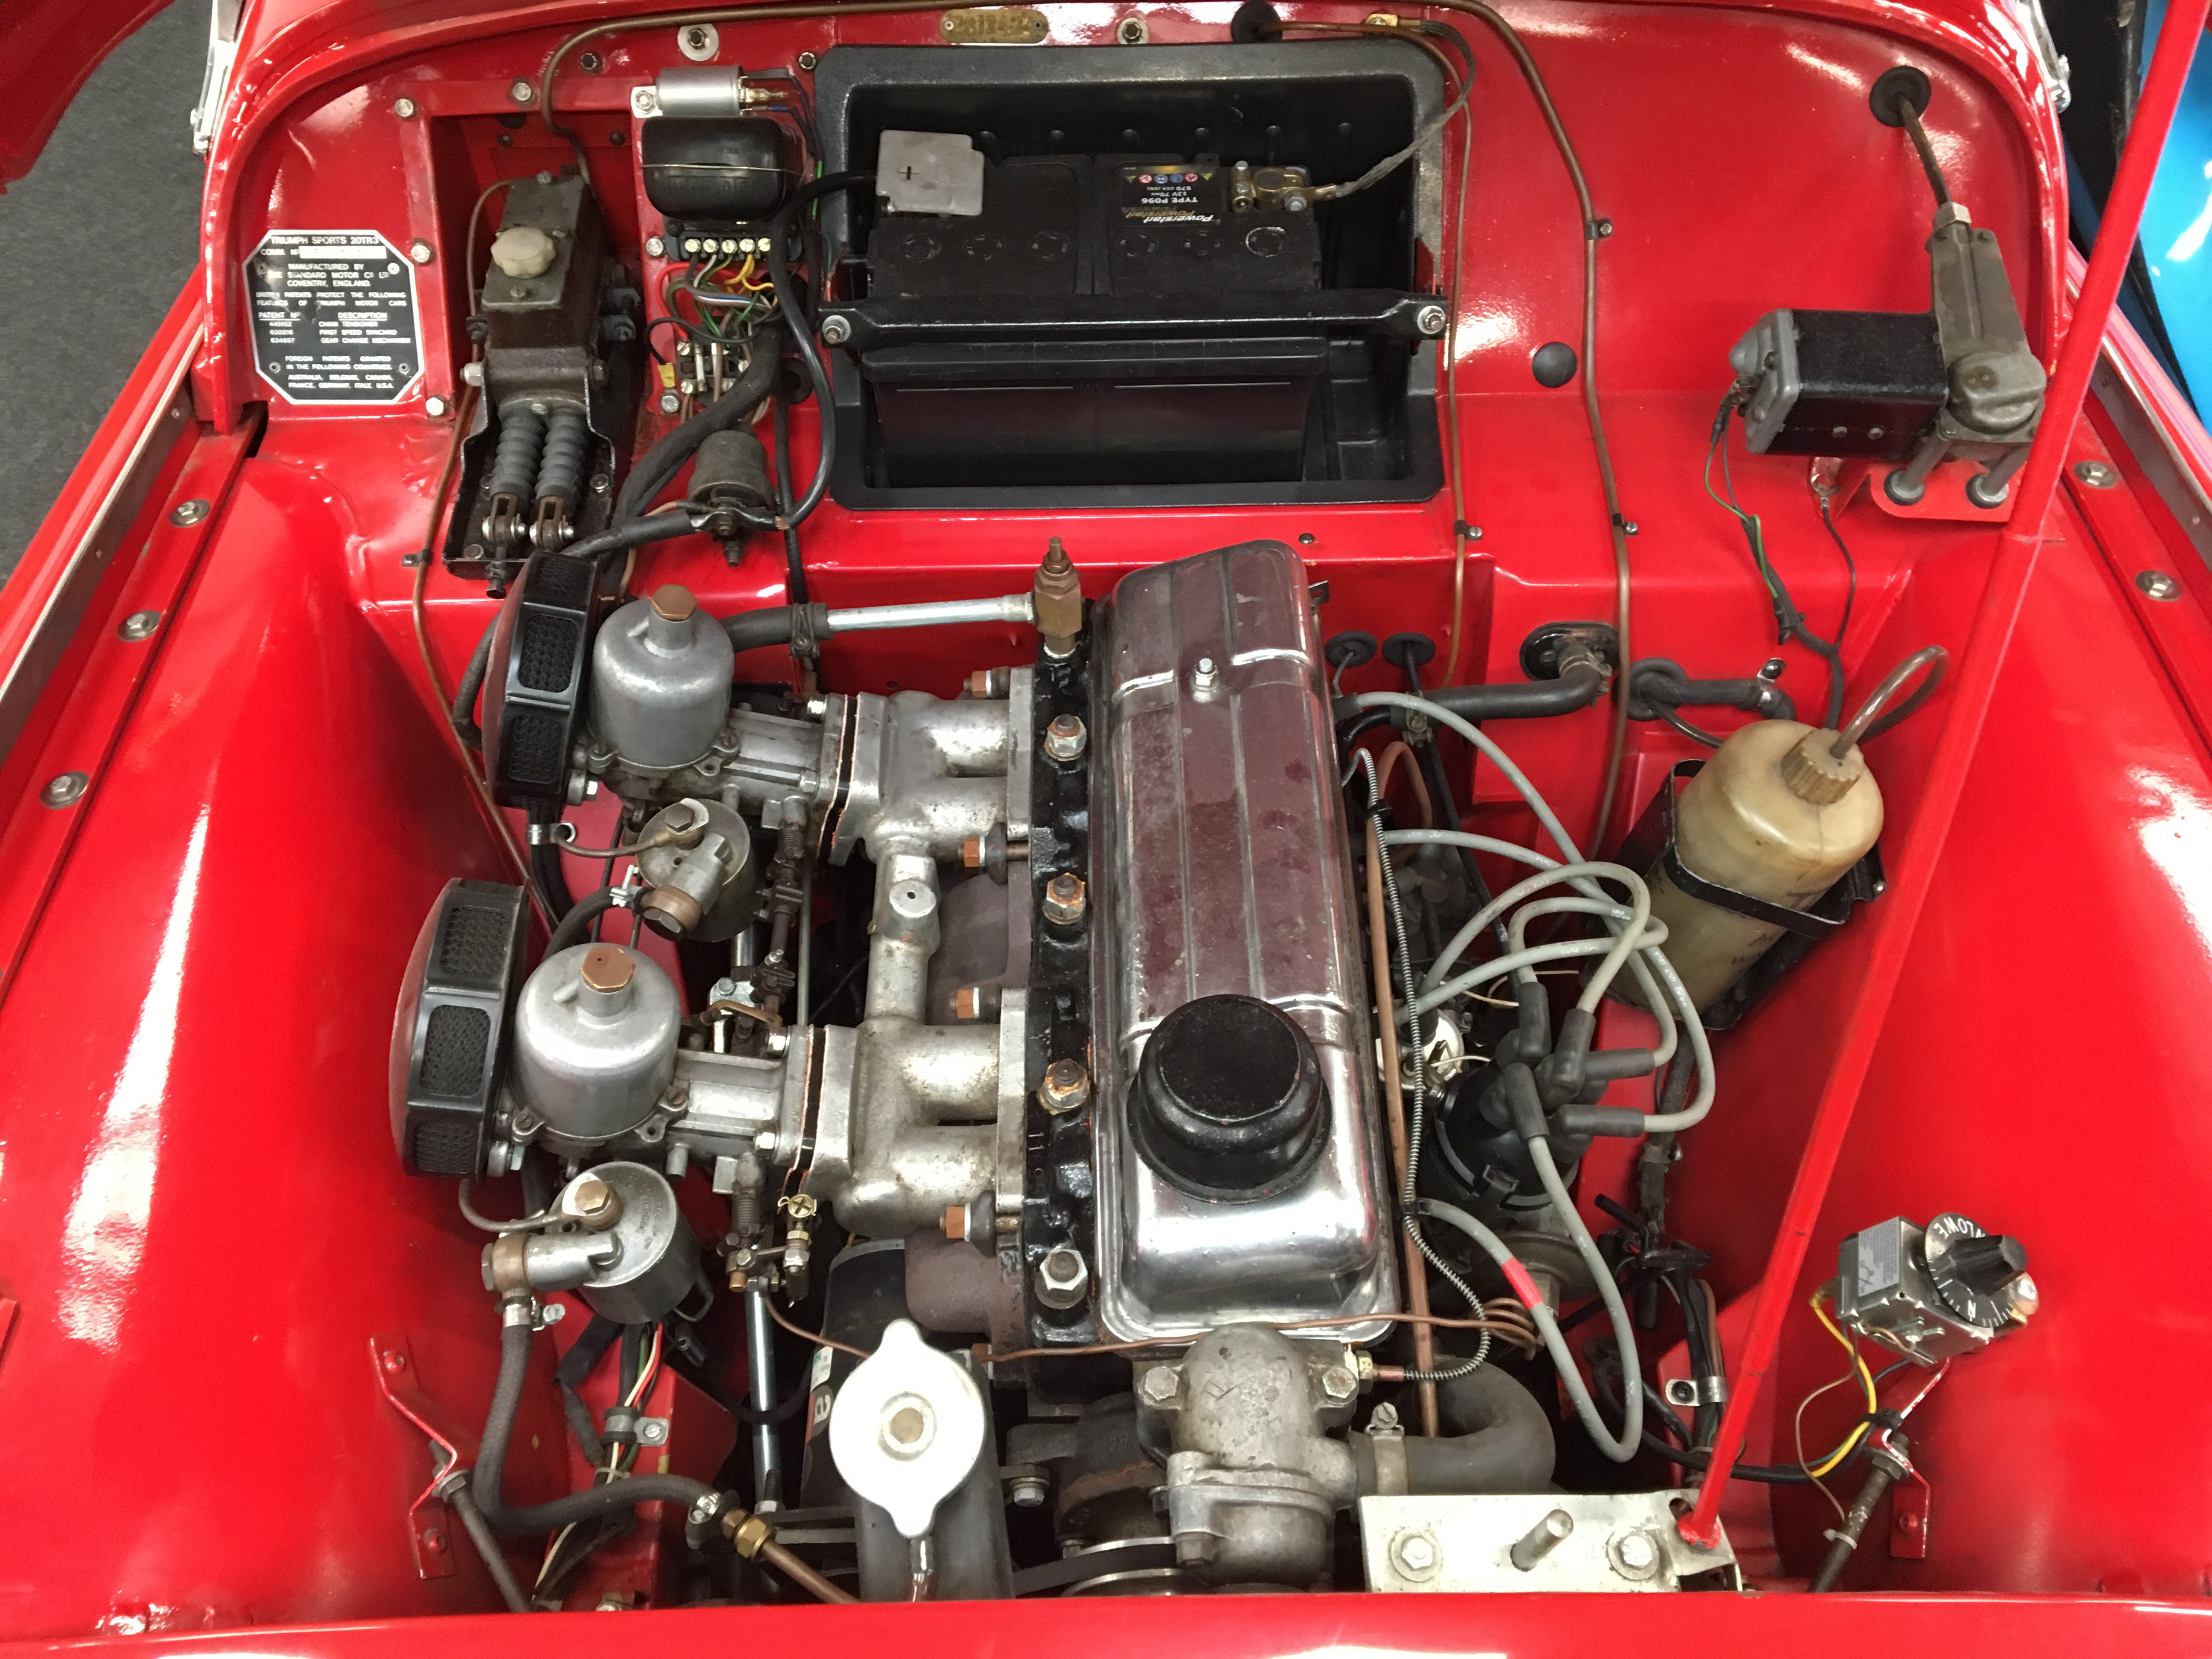 A Classic red Triumph TR3 First registered in 1957 and fitted with a 1991cc petrol engine.A historic - Image 3 of 8